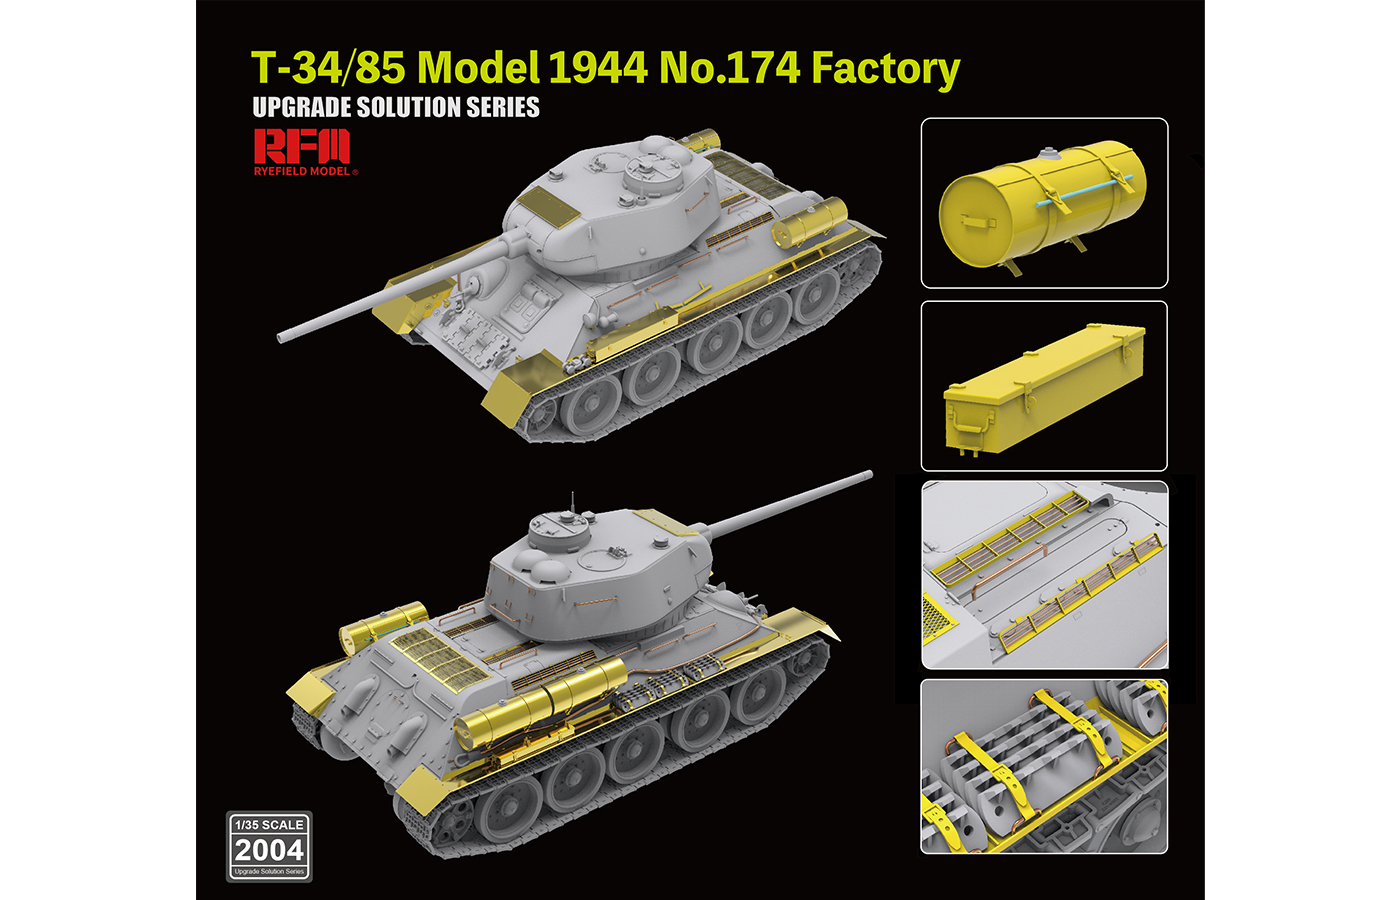 T-34/85 Model 1944 No.174 Factory Upgrade Solution Series